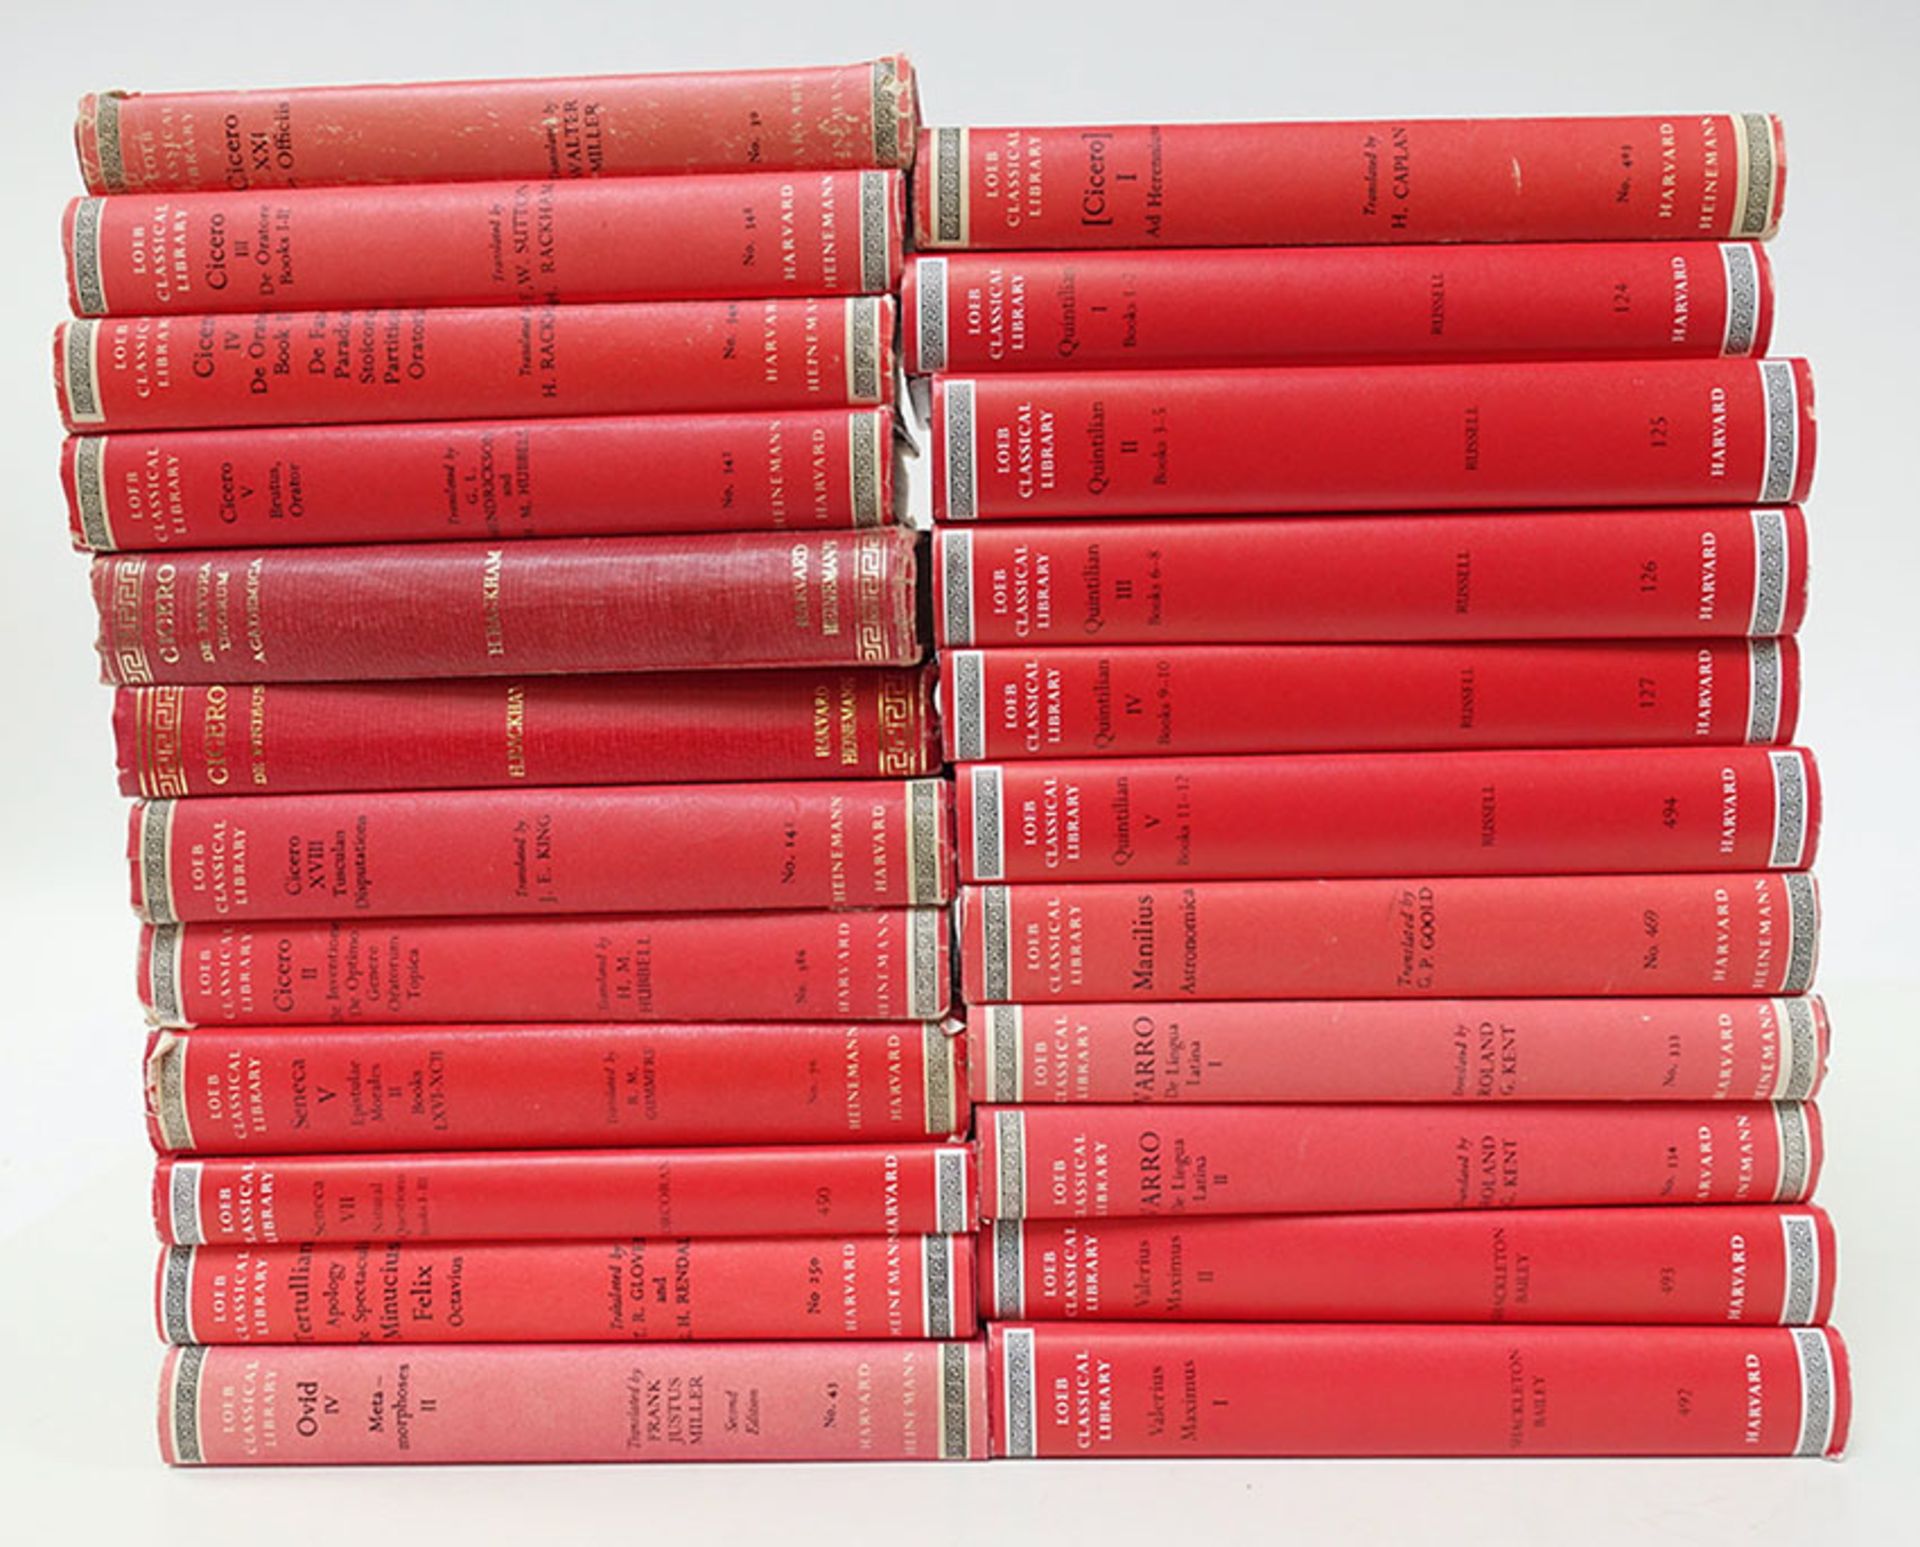 LOEB CLASSICAL LIBRARY. Latin authors. Lond., (1970-2001). 23 vols. of the series. Ocl. (21) w.